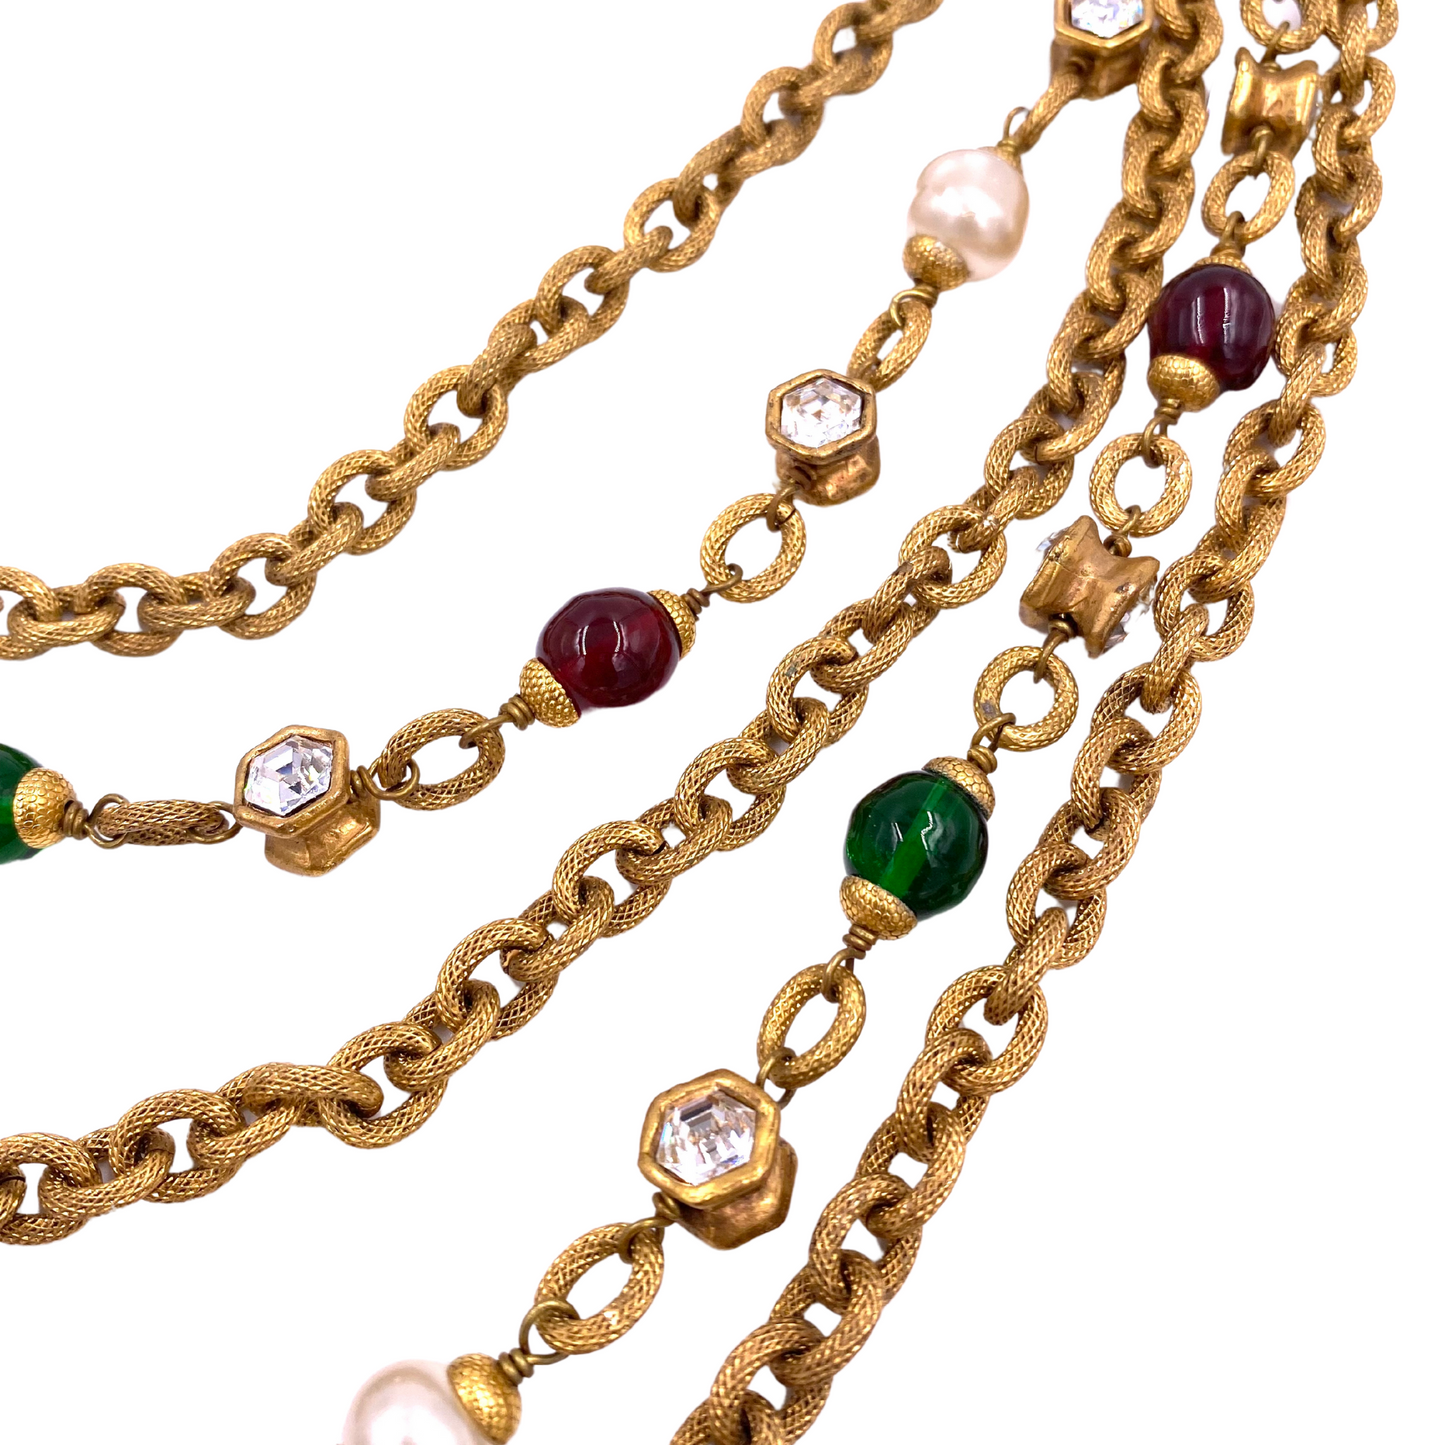 Chanel 1984 Multi Chain with Gripoix Purple/Green Stones Necklace